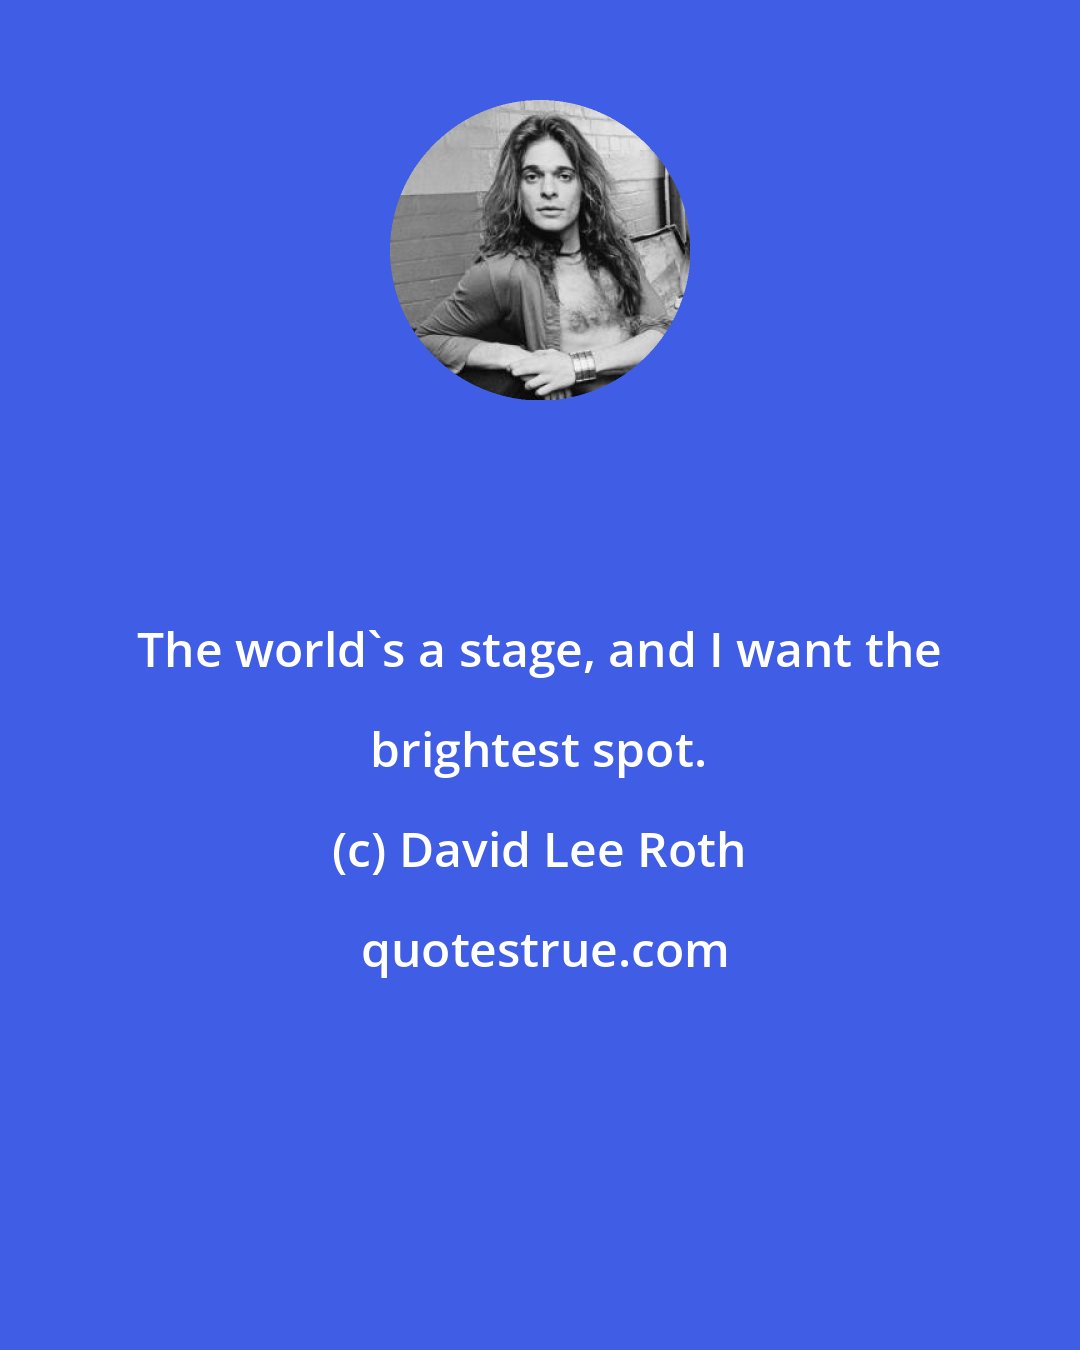 David Lee Roth: The world's a stage, and I want the brightest spot.